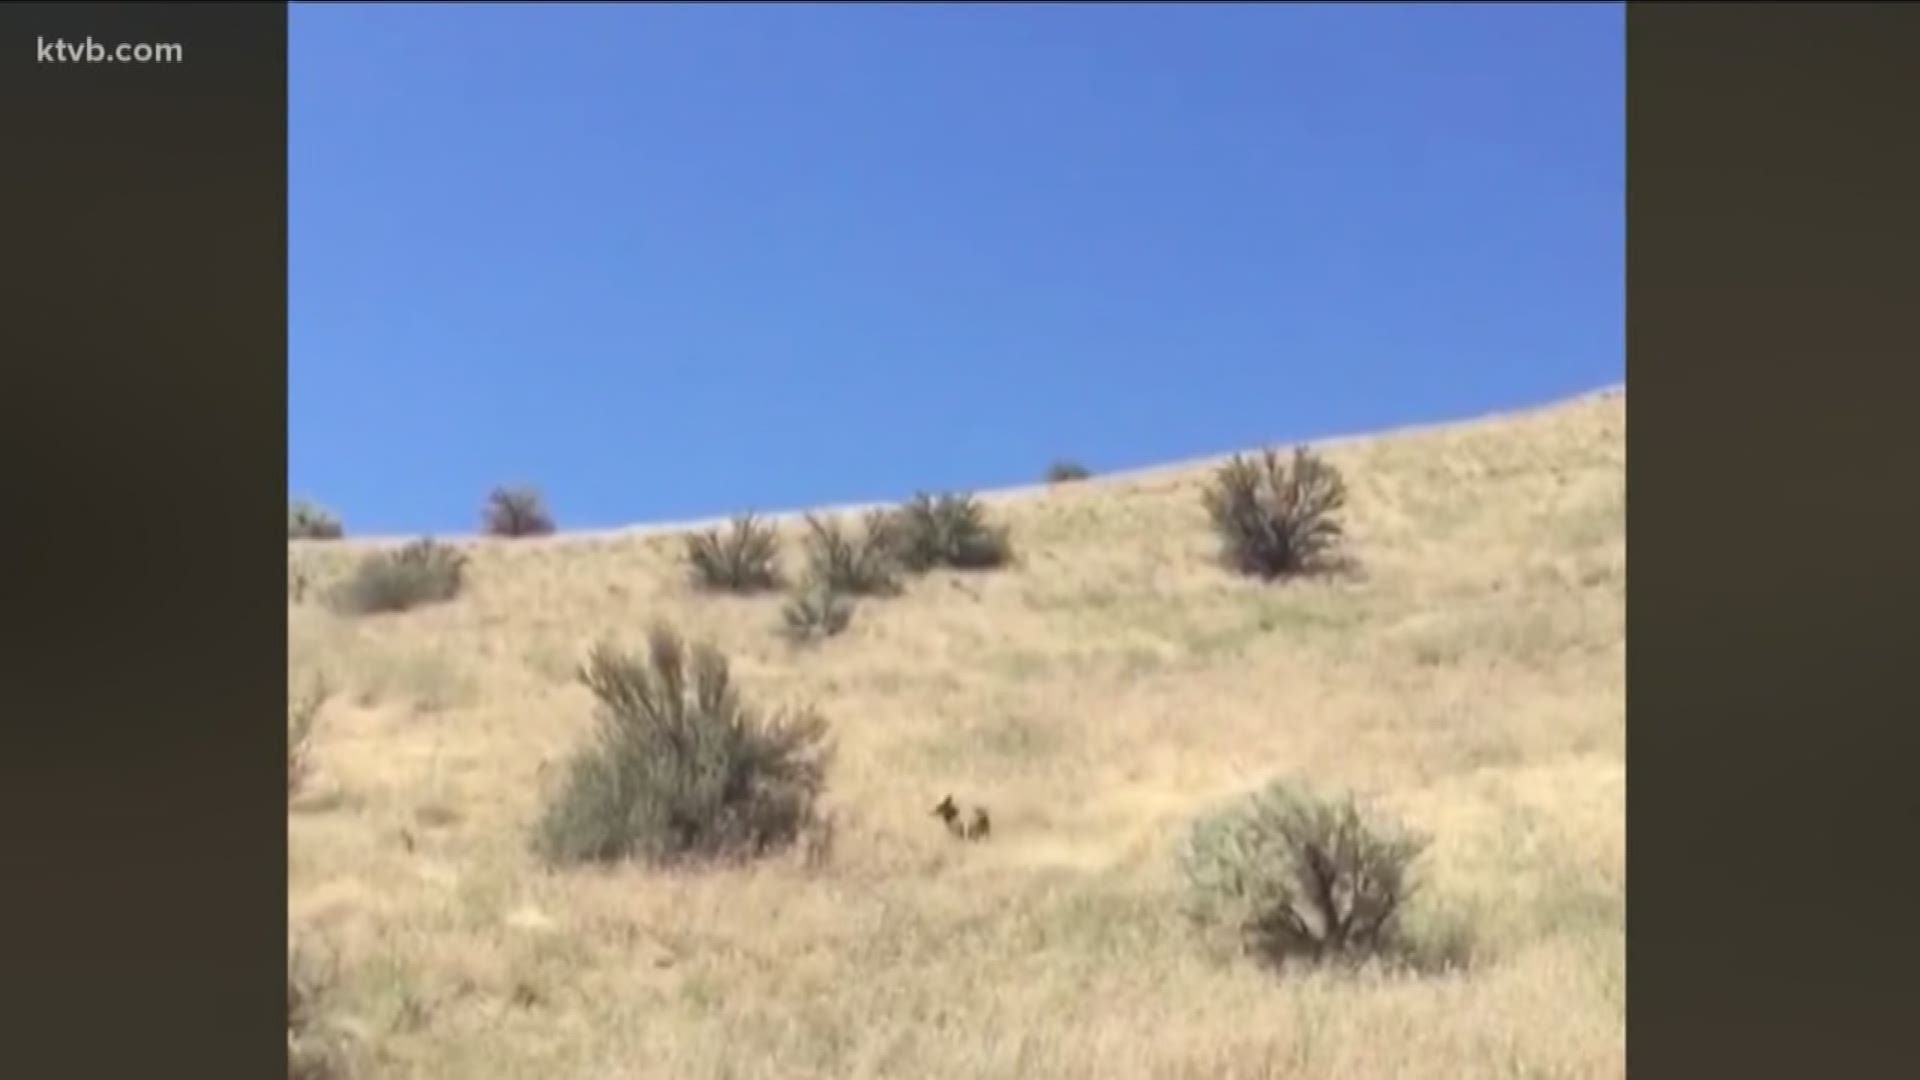 Fish and Game officials believe the coyote is protecting her pups.